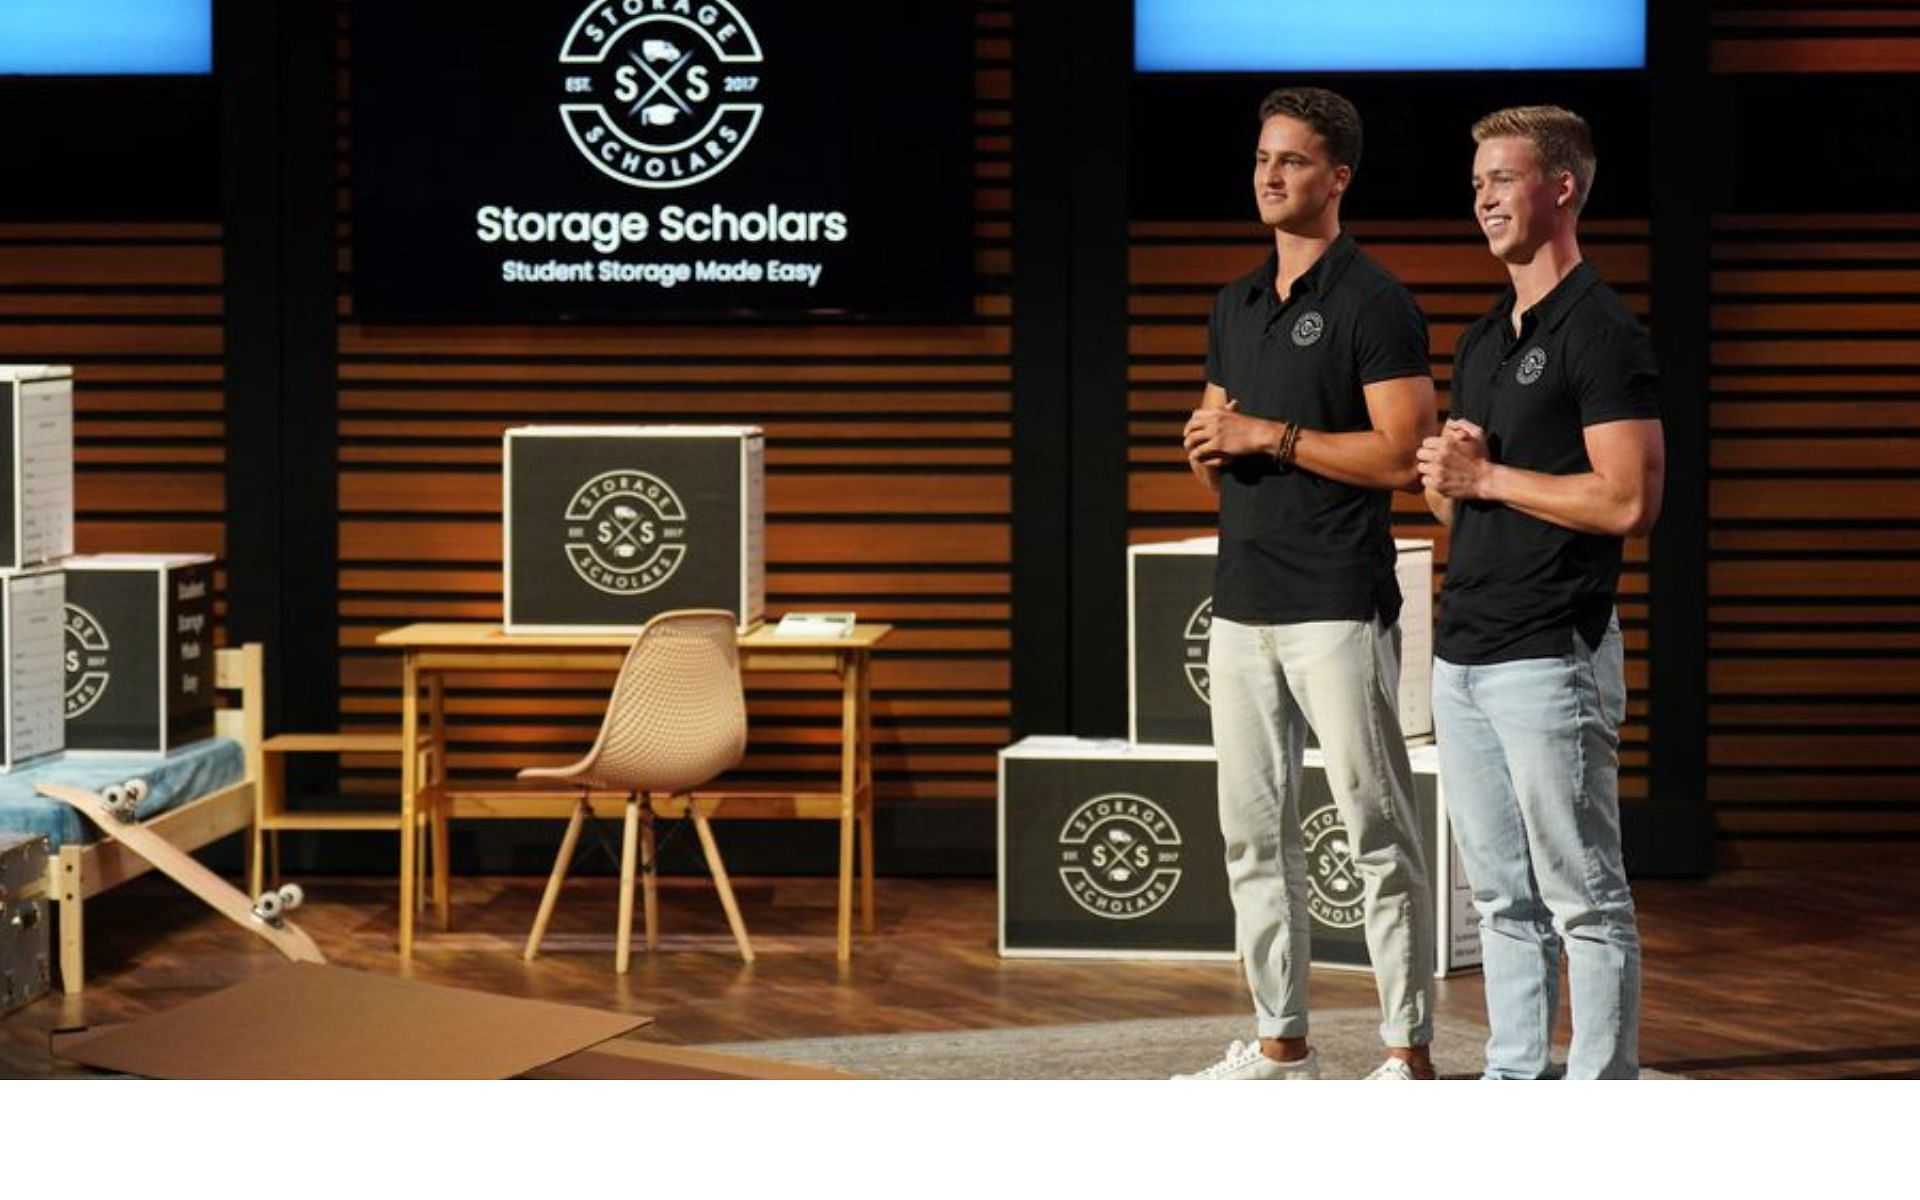 Storage Scholars currently operates in 23 campuses (Image via Christopher Willard/ ABC)